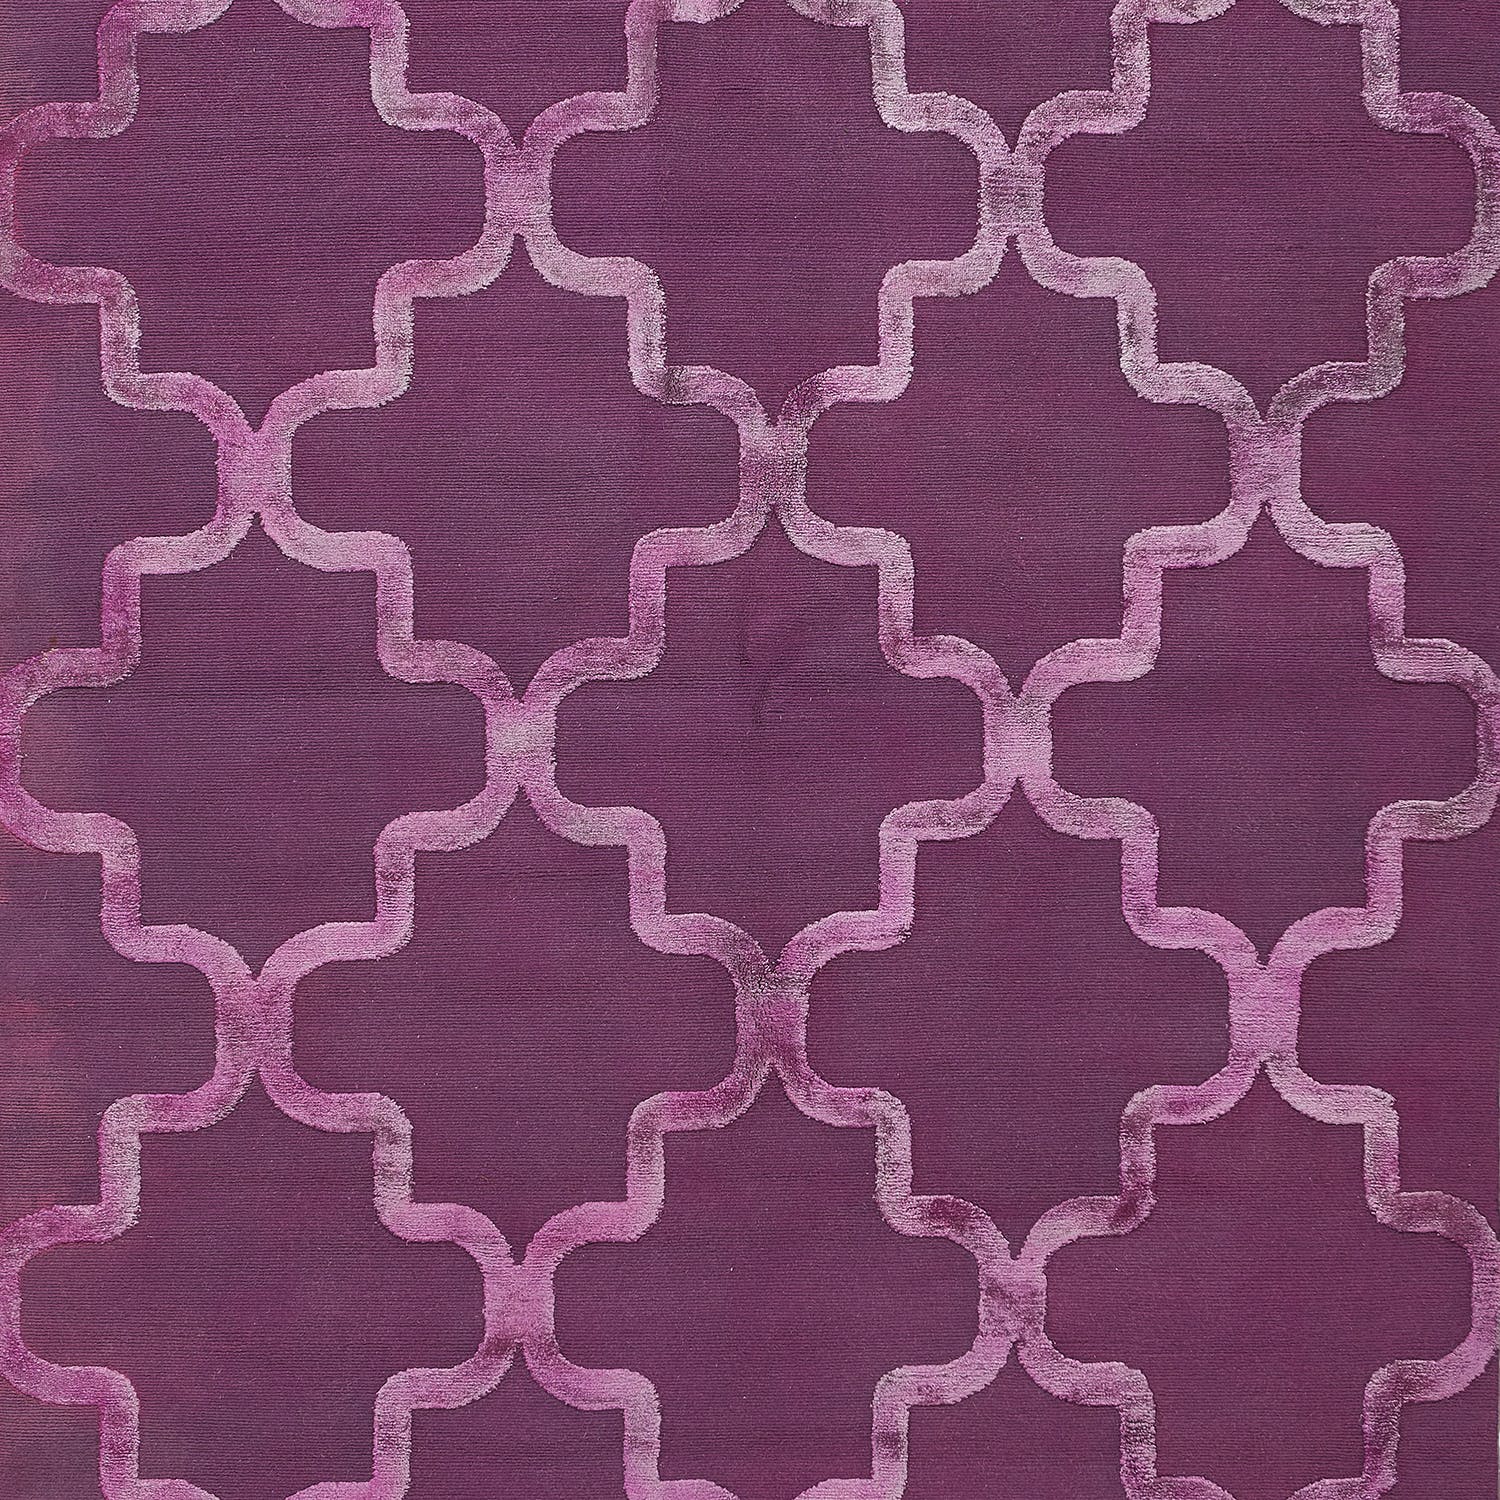 Patterned fabric with geometric design in deep purple, luxurious feel.